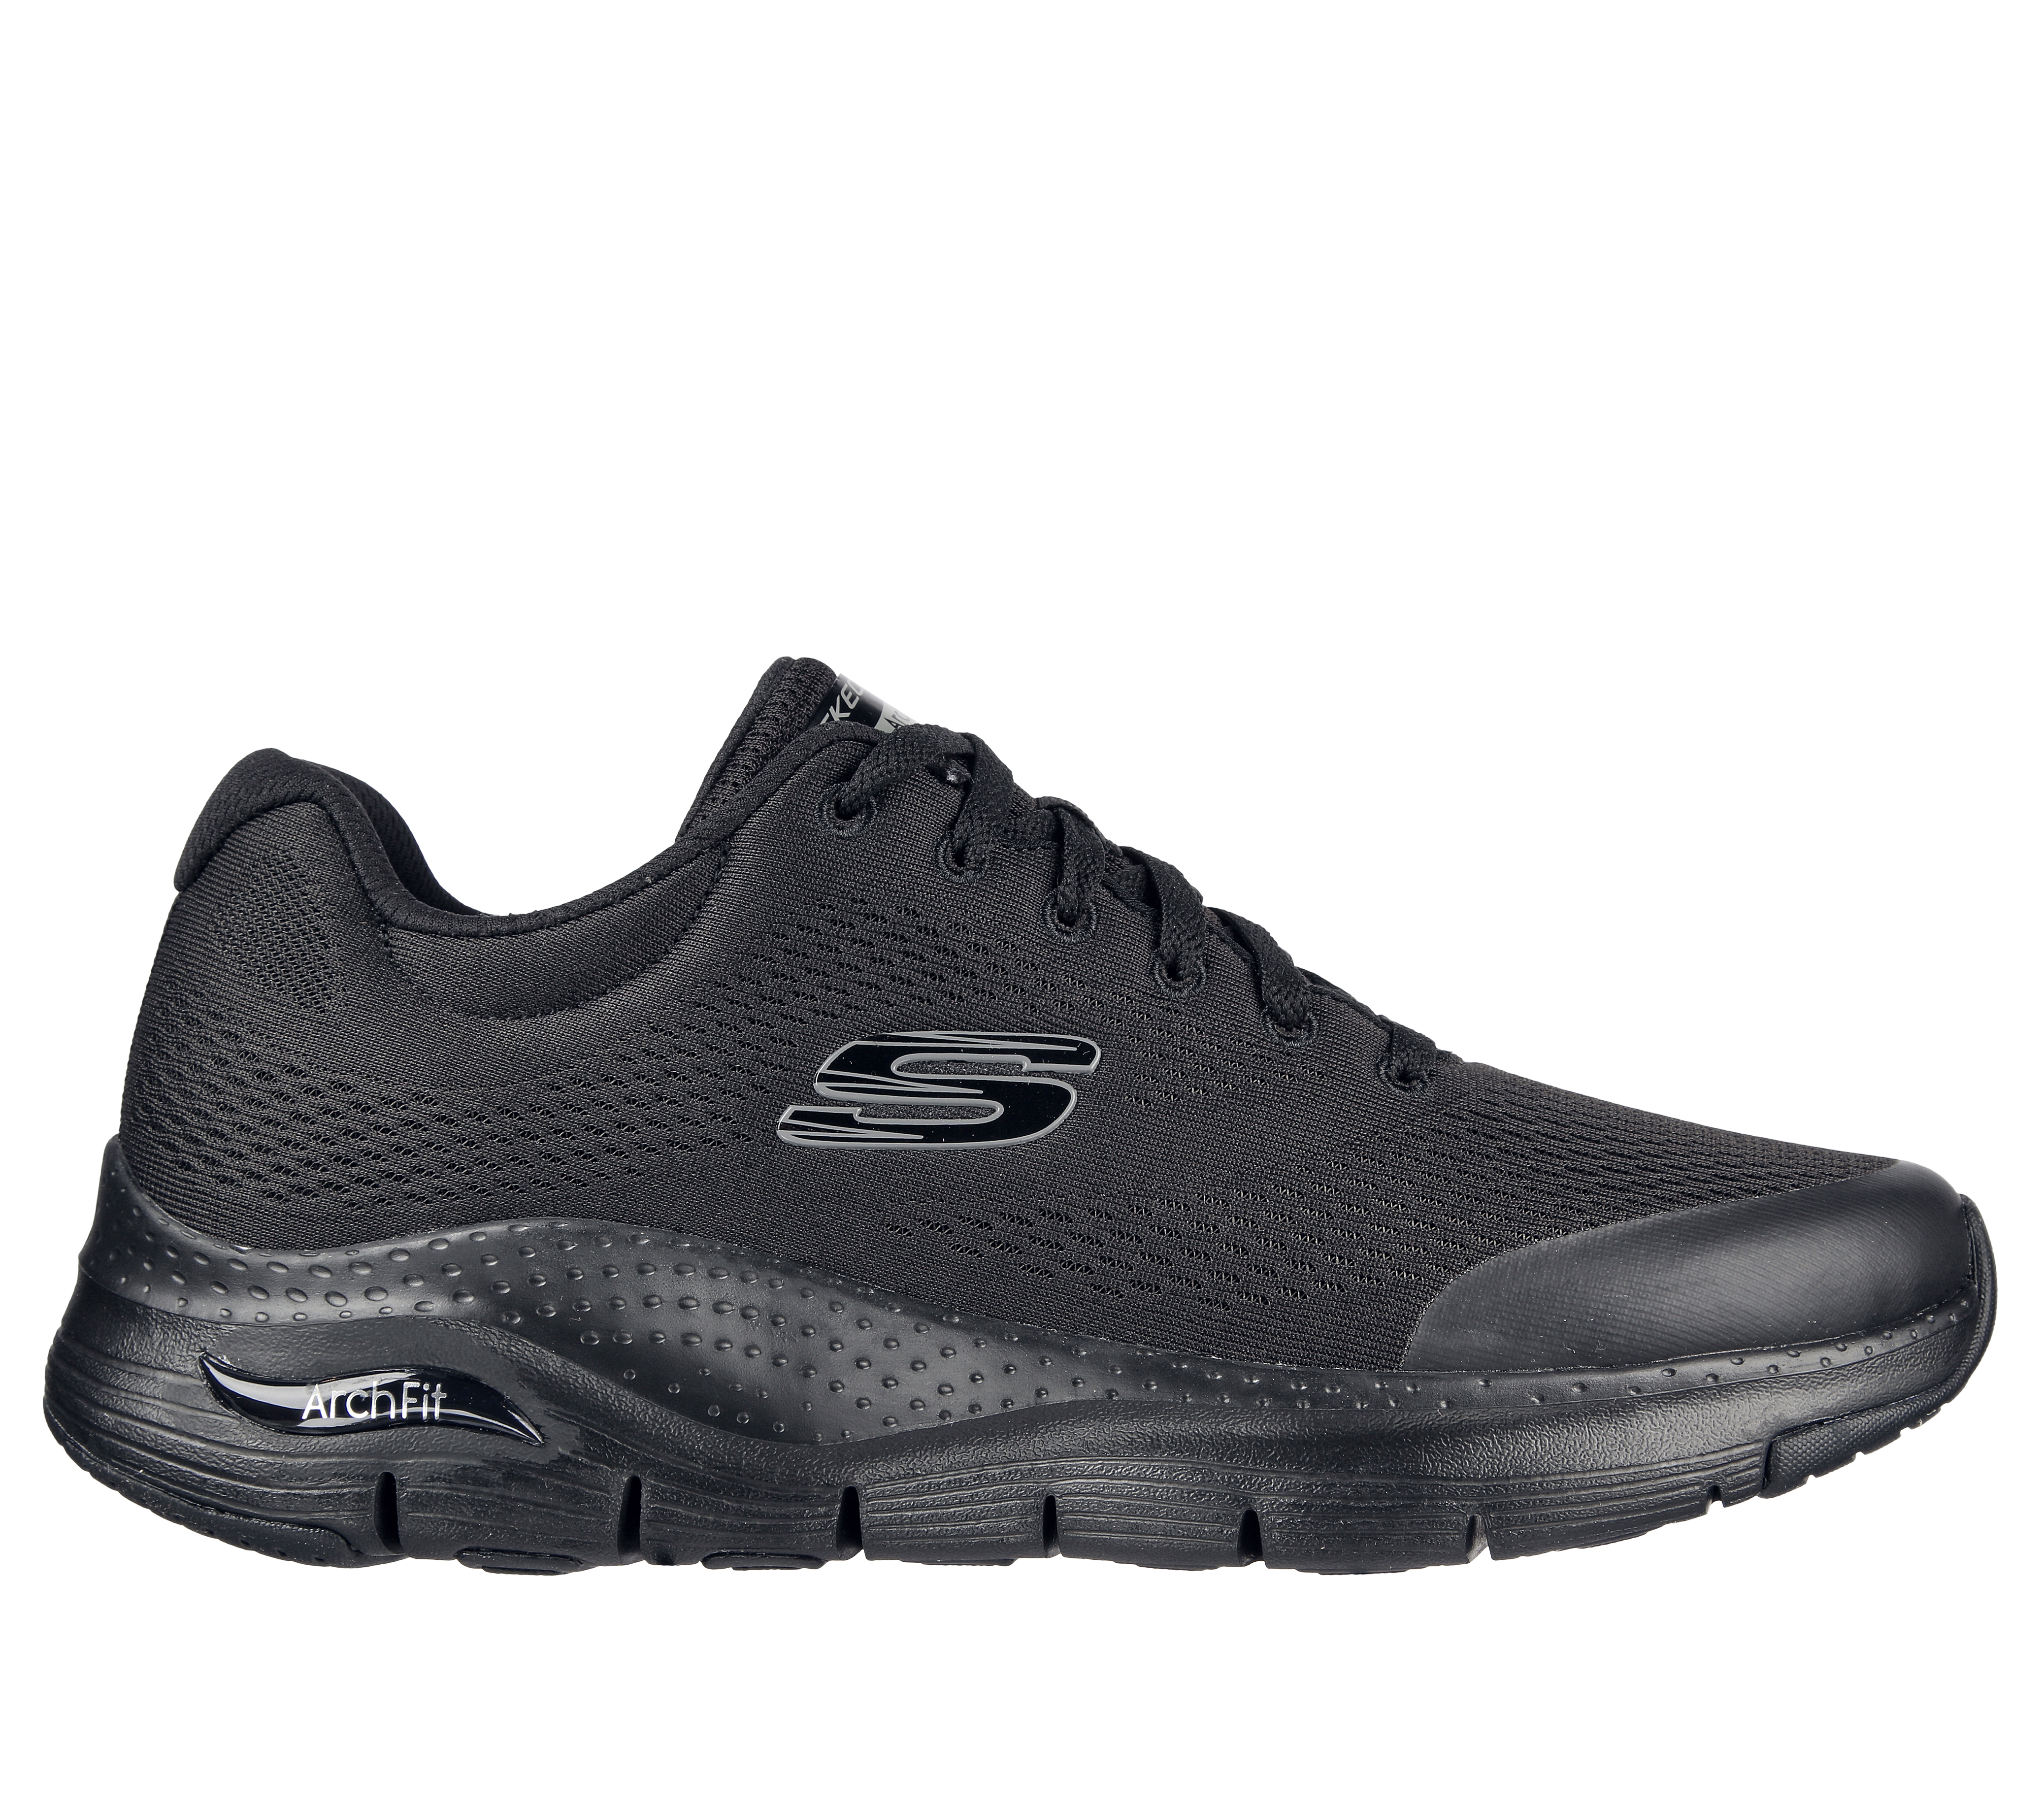 What is Skechers Arch Fit?